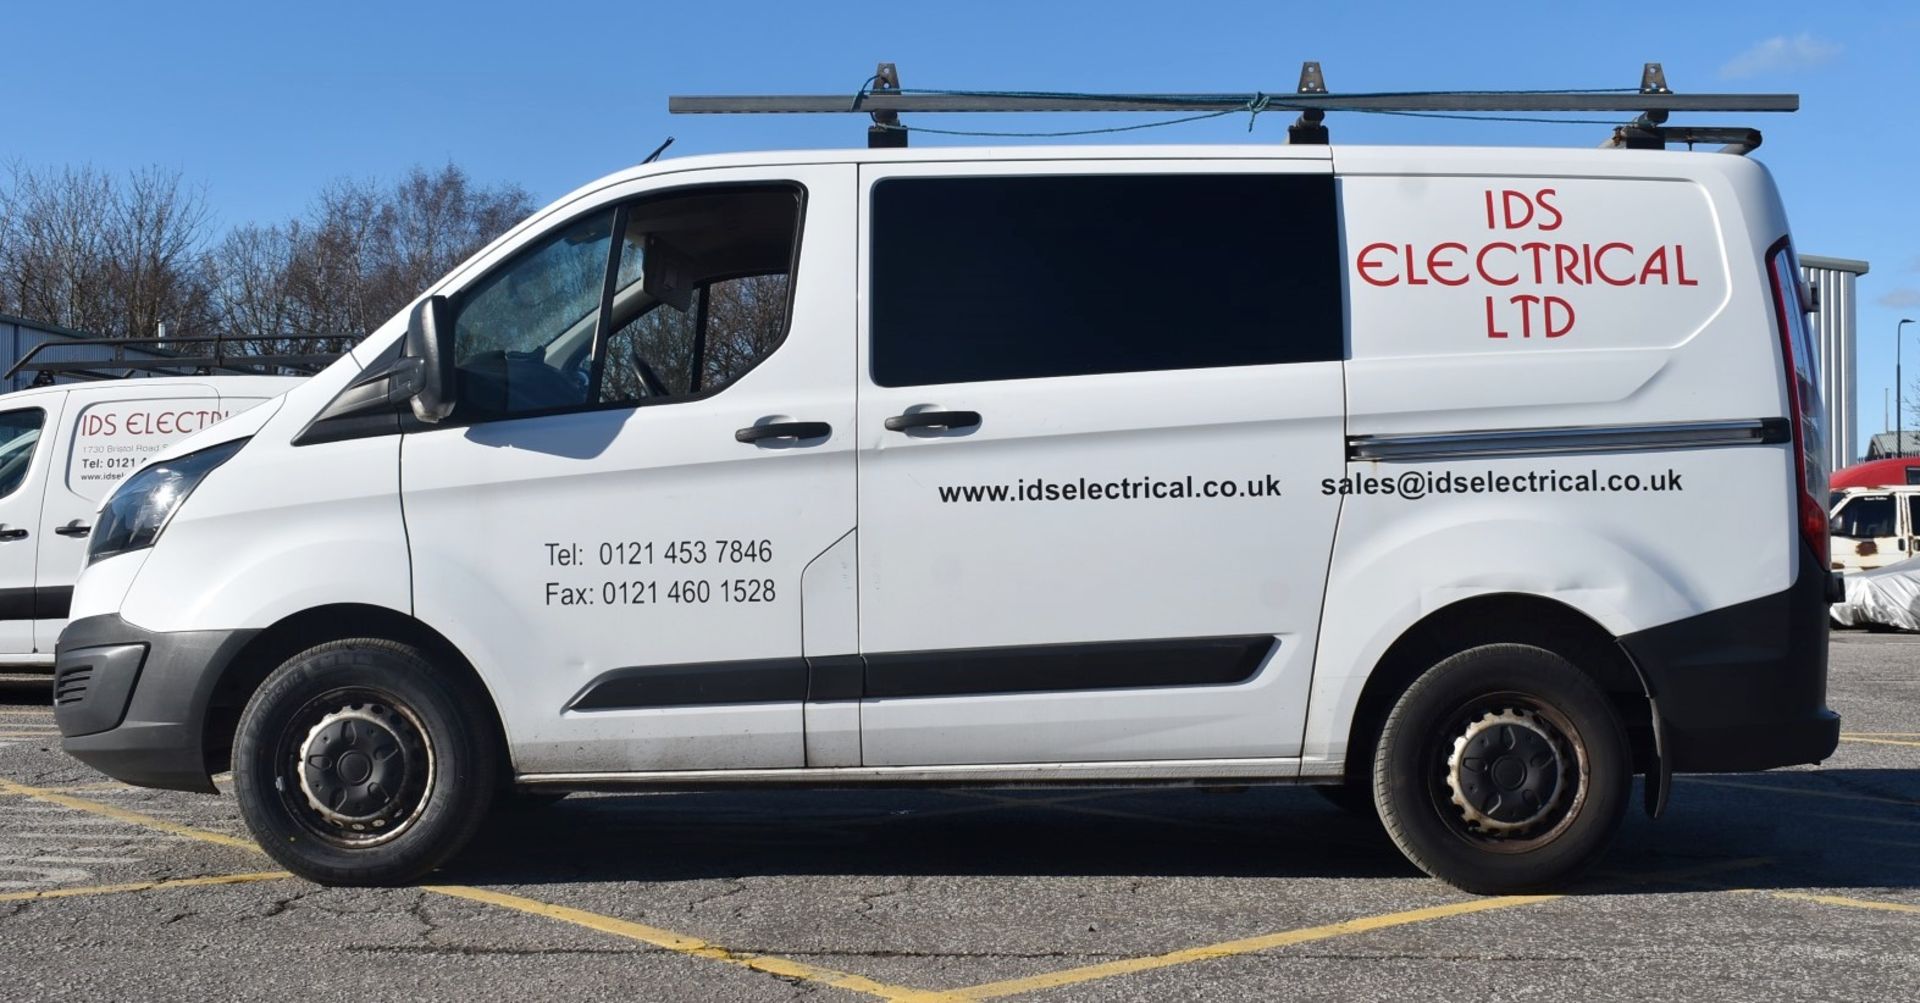 1 x Ford Transit 5 Seat Crew Van - Year 2017 - 12 Months MOT - Includes V5 and Key - Image 8 of 34